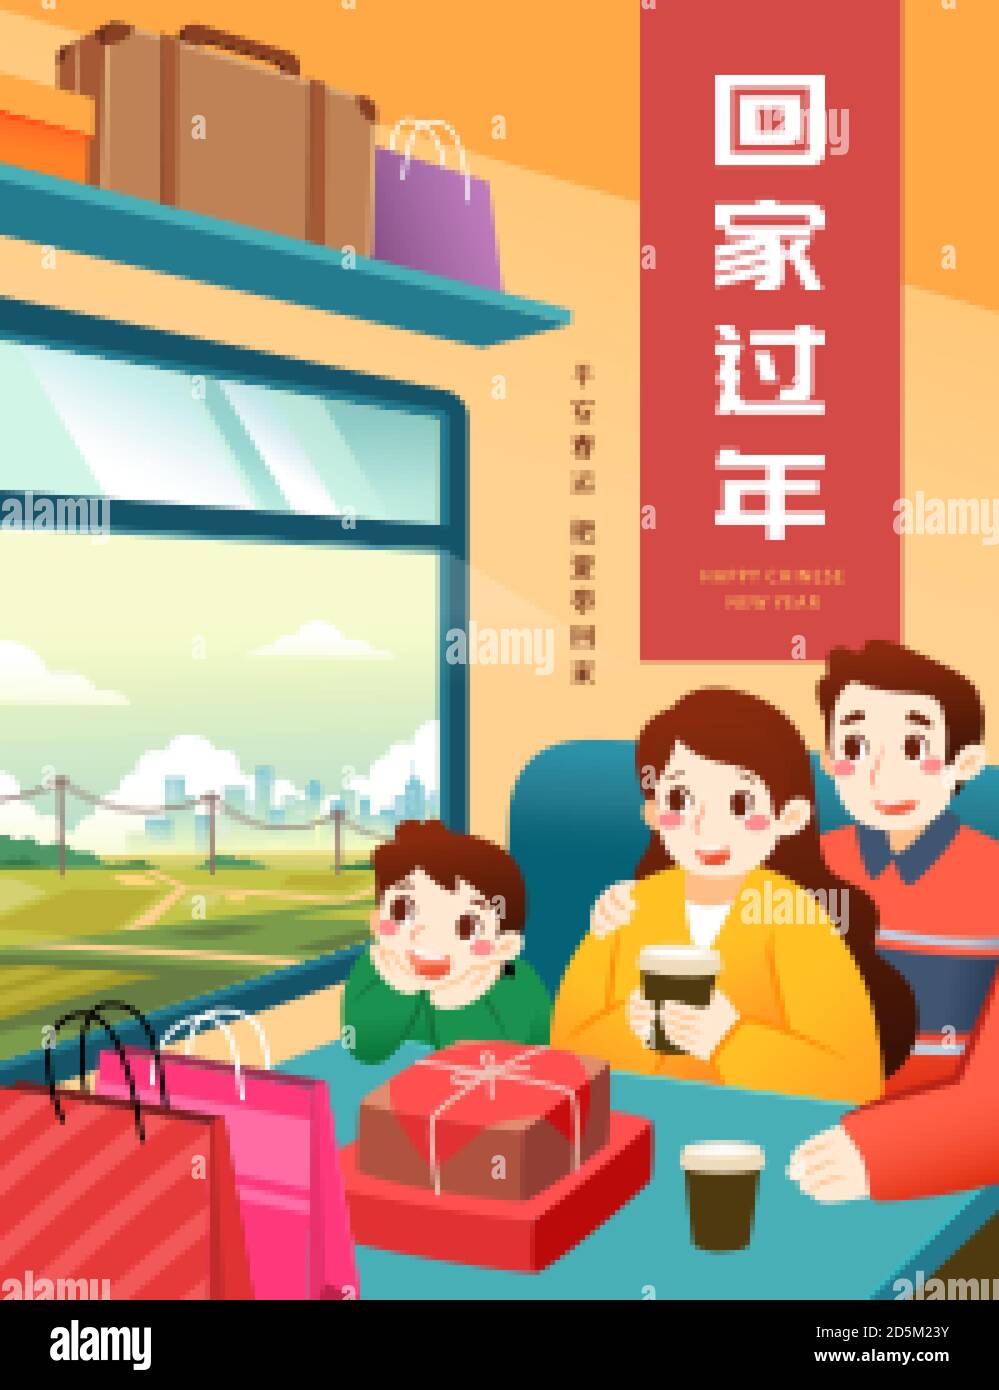 Illustration of Chinese New Year travel rush with cute family sitting on train, Translation: Return to hometown, Stay safe during travel rush, Bring l Stock Vector